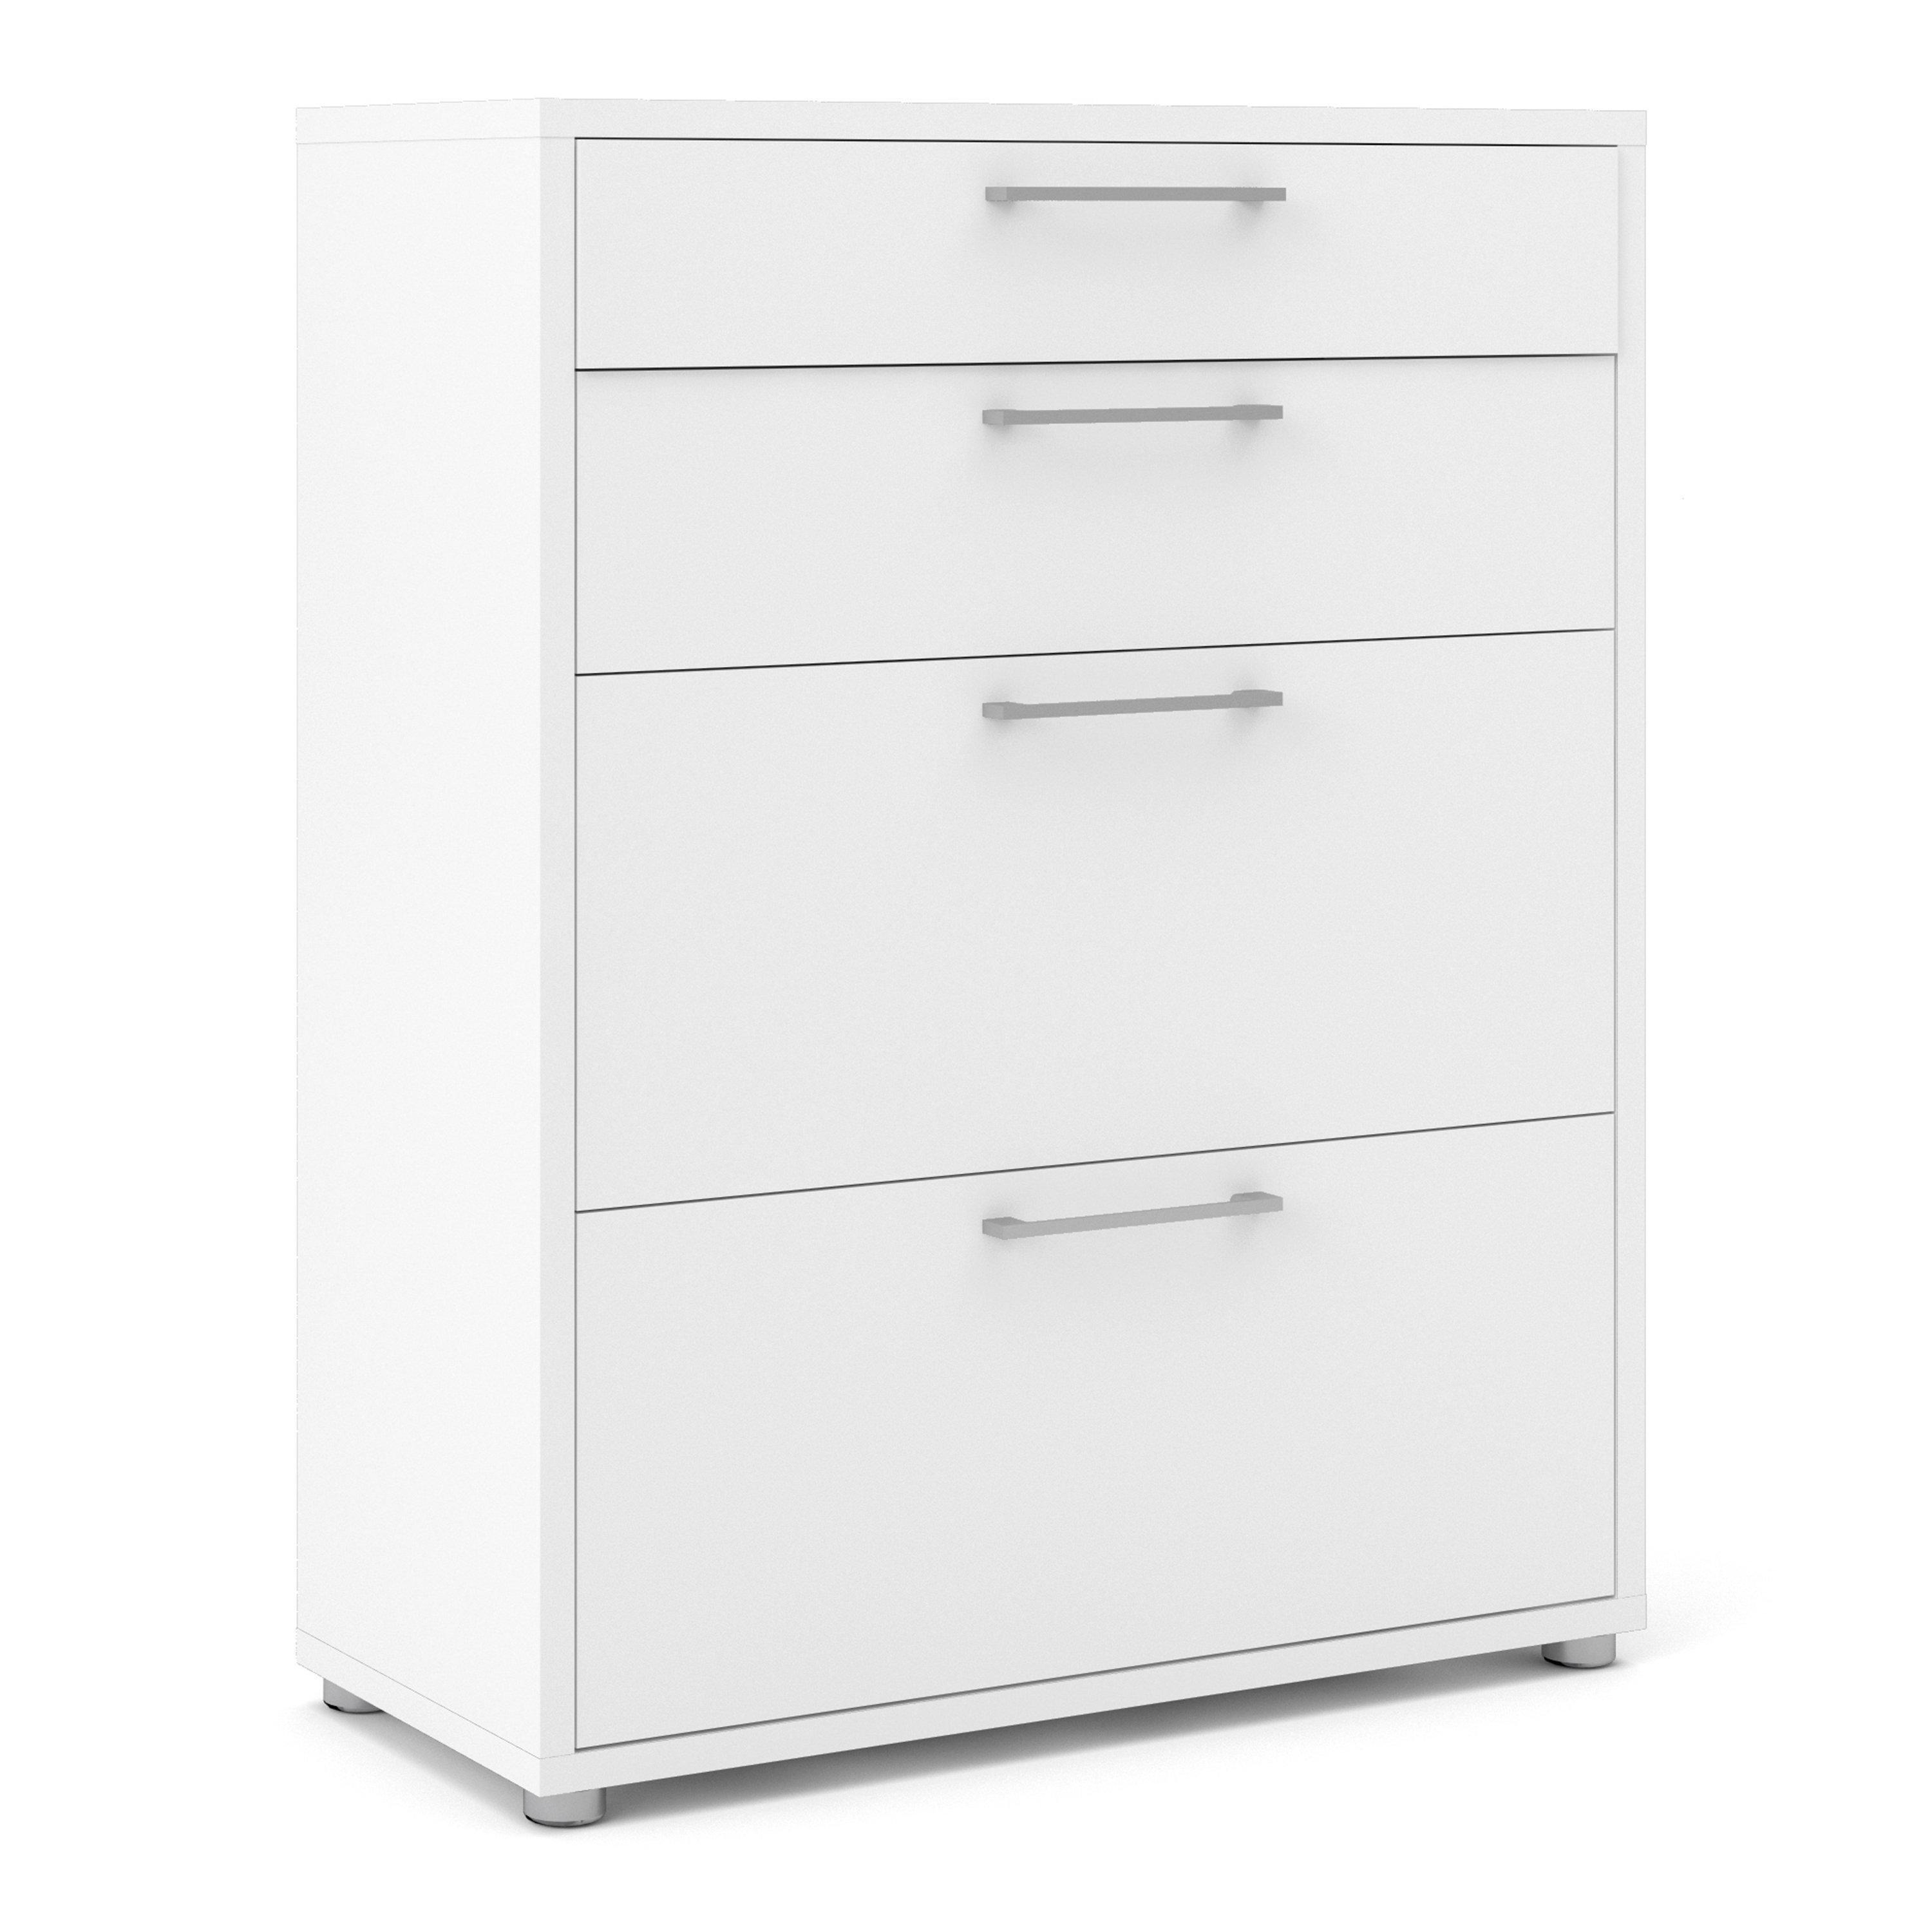 Prima Office Storage with 2 Drawers 2 File Drawers - image 1